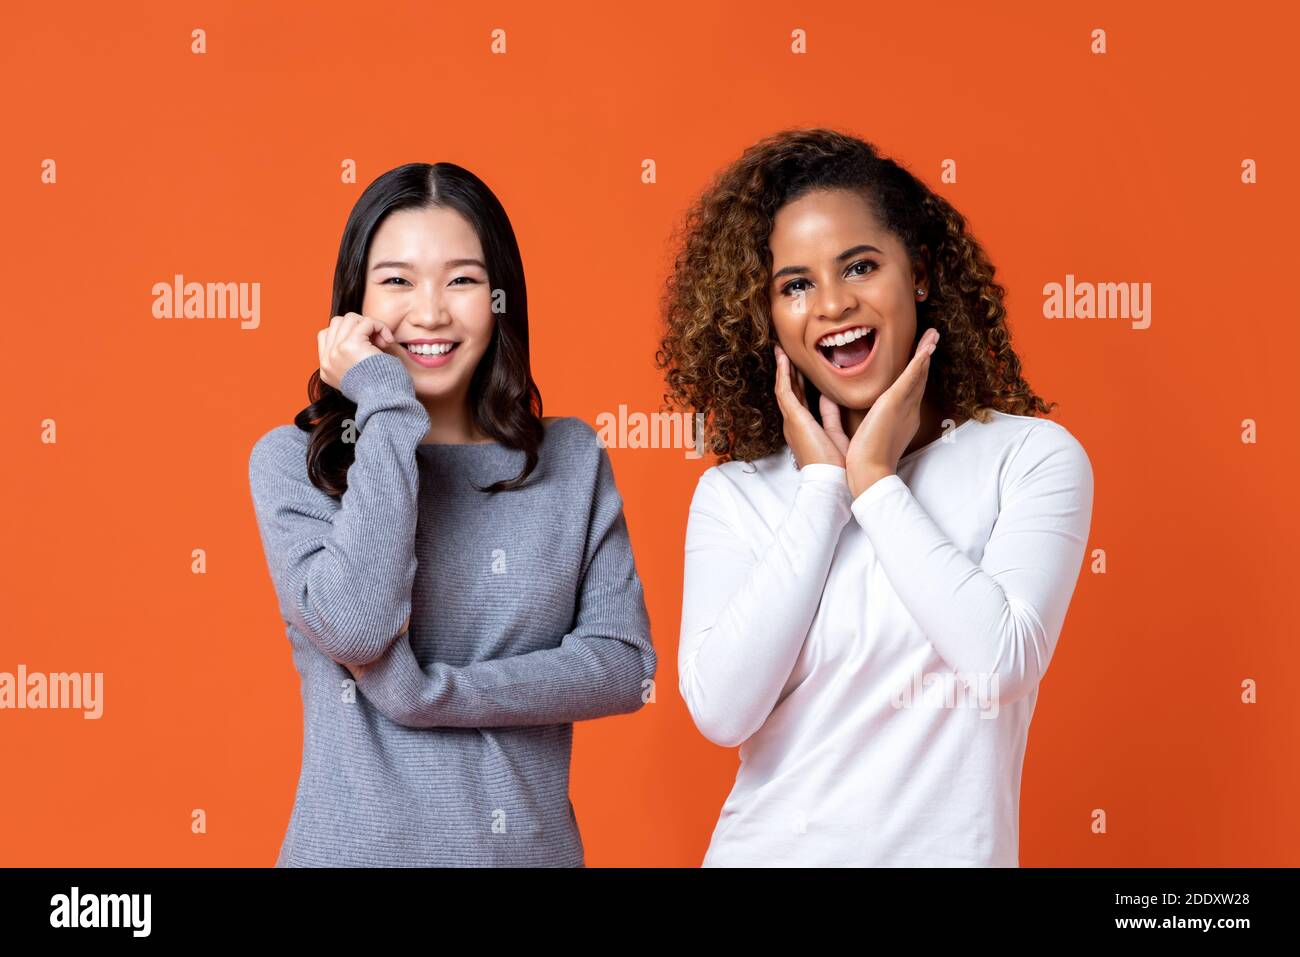 Smiling Asian and African American woman friends in surprised gesture isolated on orange background. Stock Photo